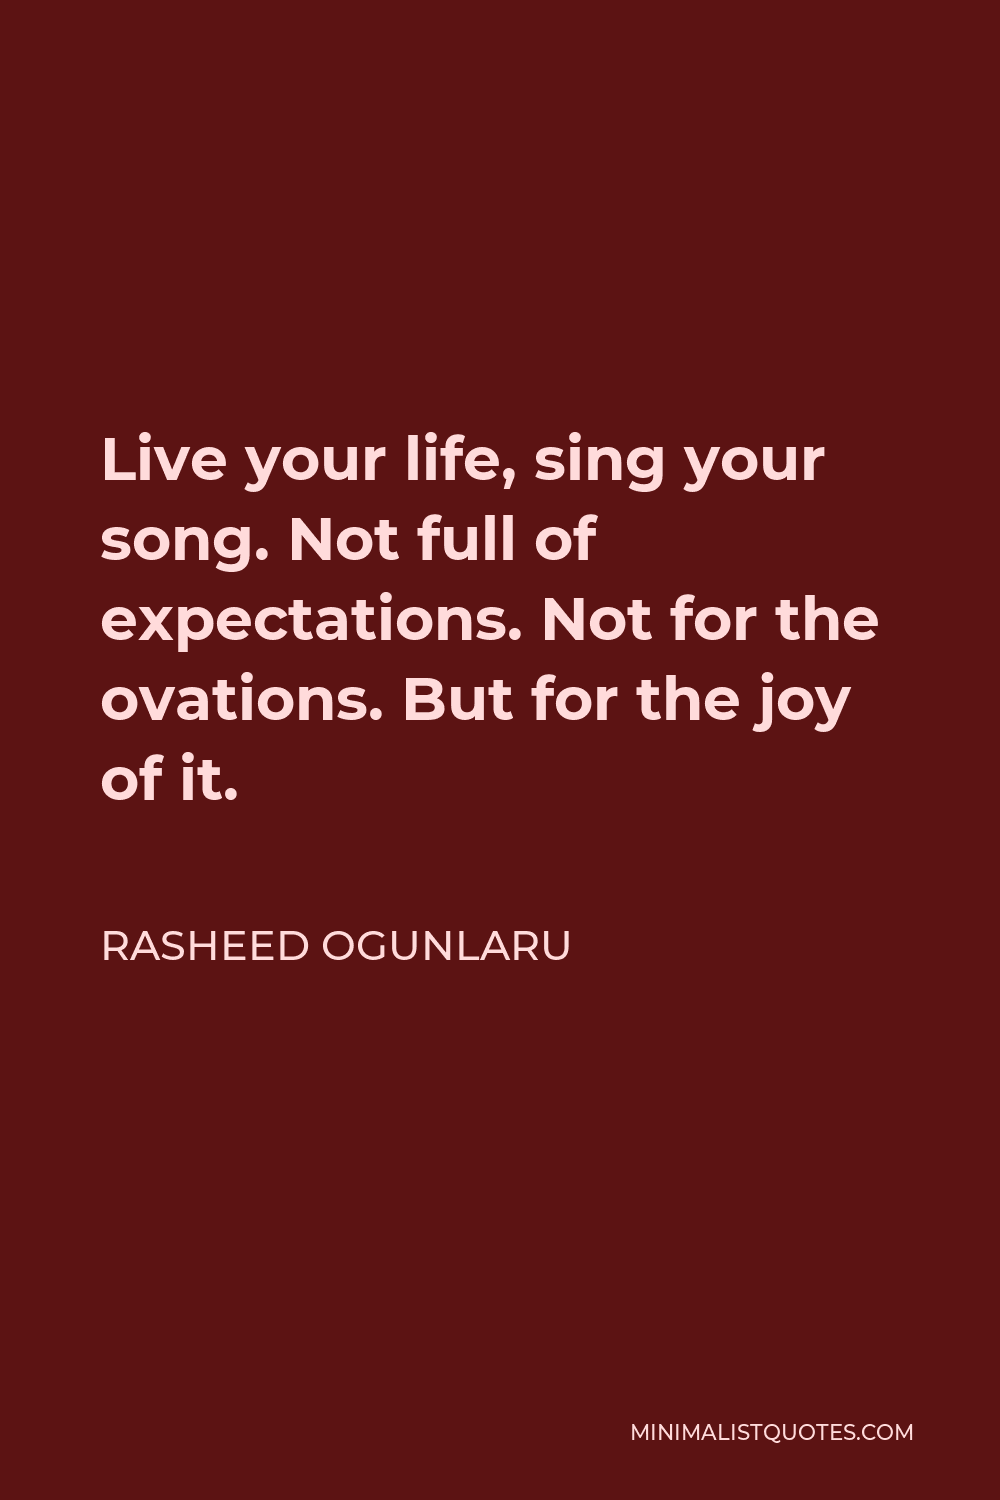 Rasheed Ogunlaru Quote - Live your life, sing your song. Not full of expectations. Not for the ovations. But for the joy of it.